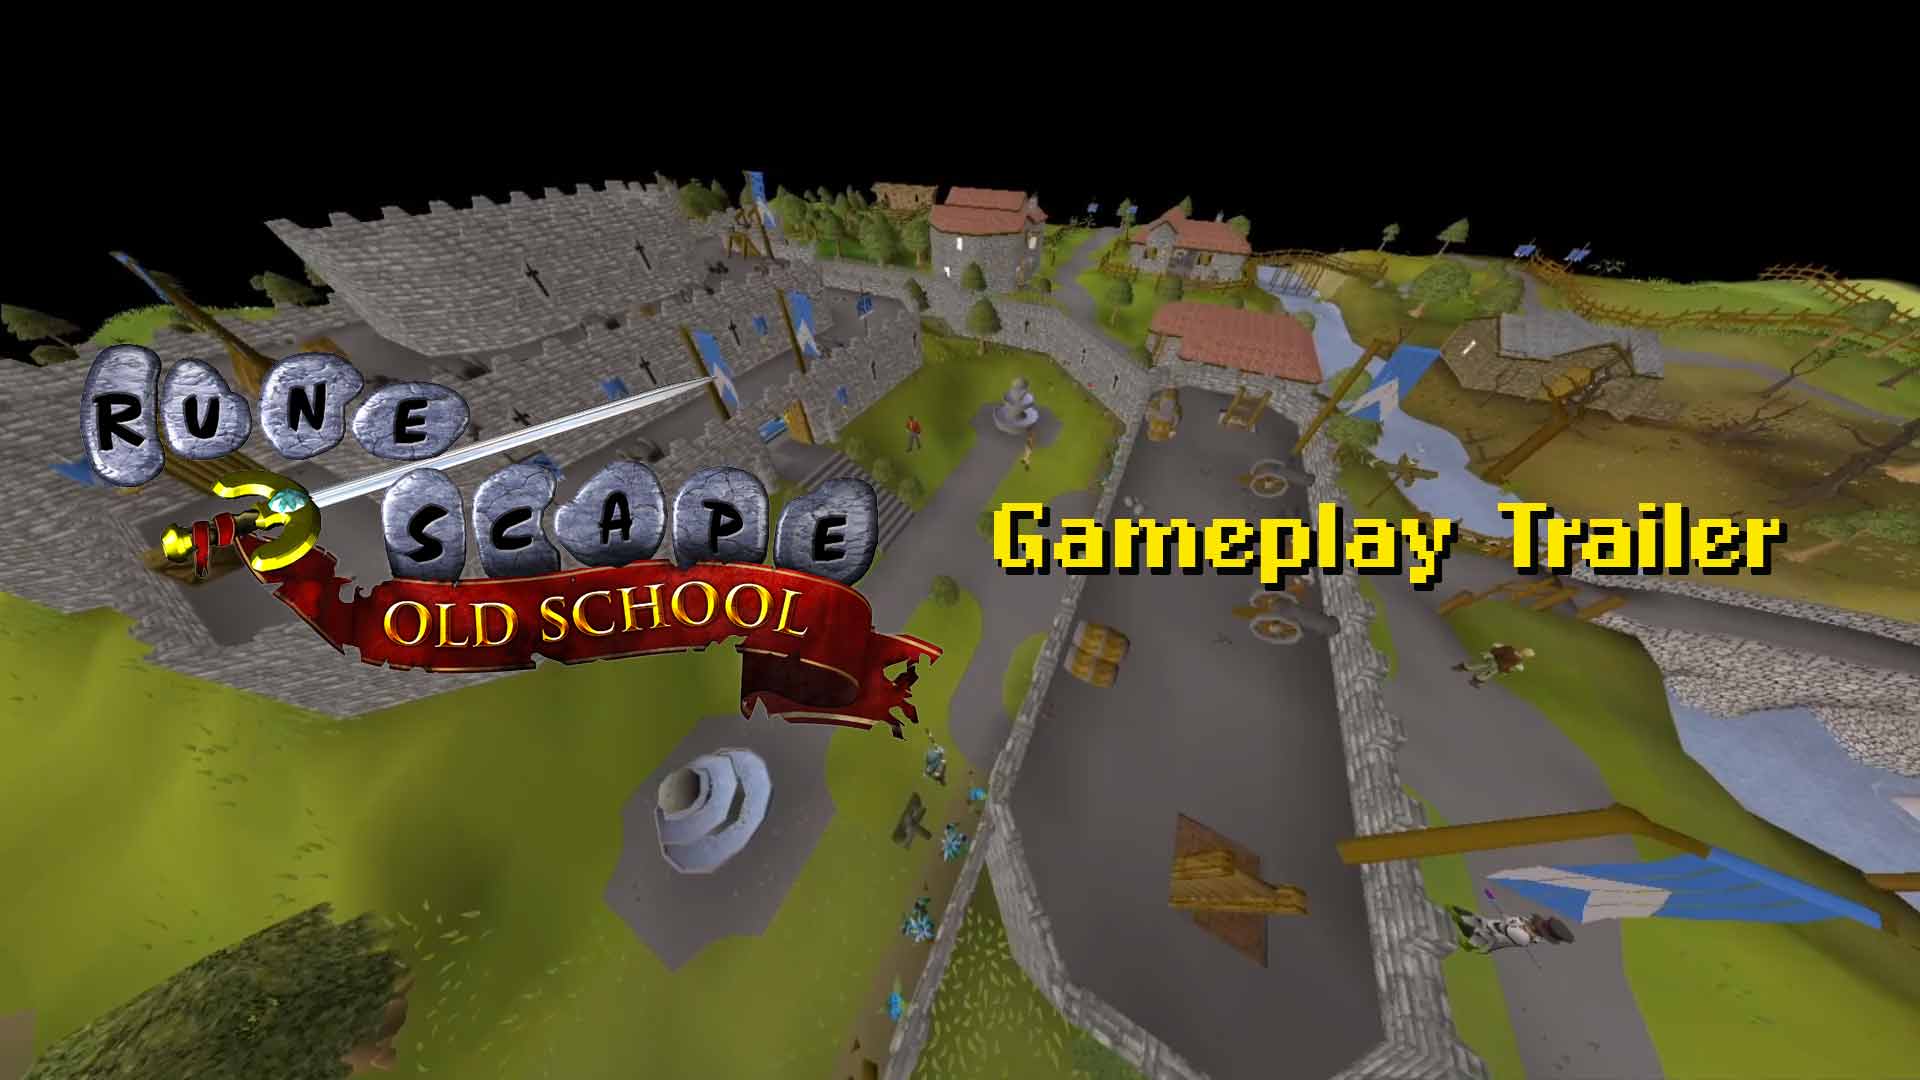 Motion + Video Editing. A passion project that was the creation of a gameplay trailer for Oldschool Runescape with the intention of attracting more people to the game.
